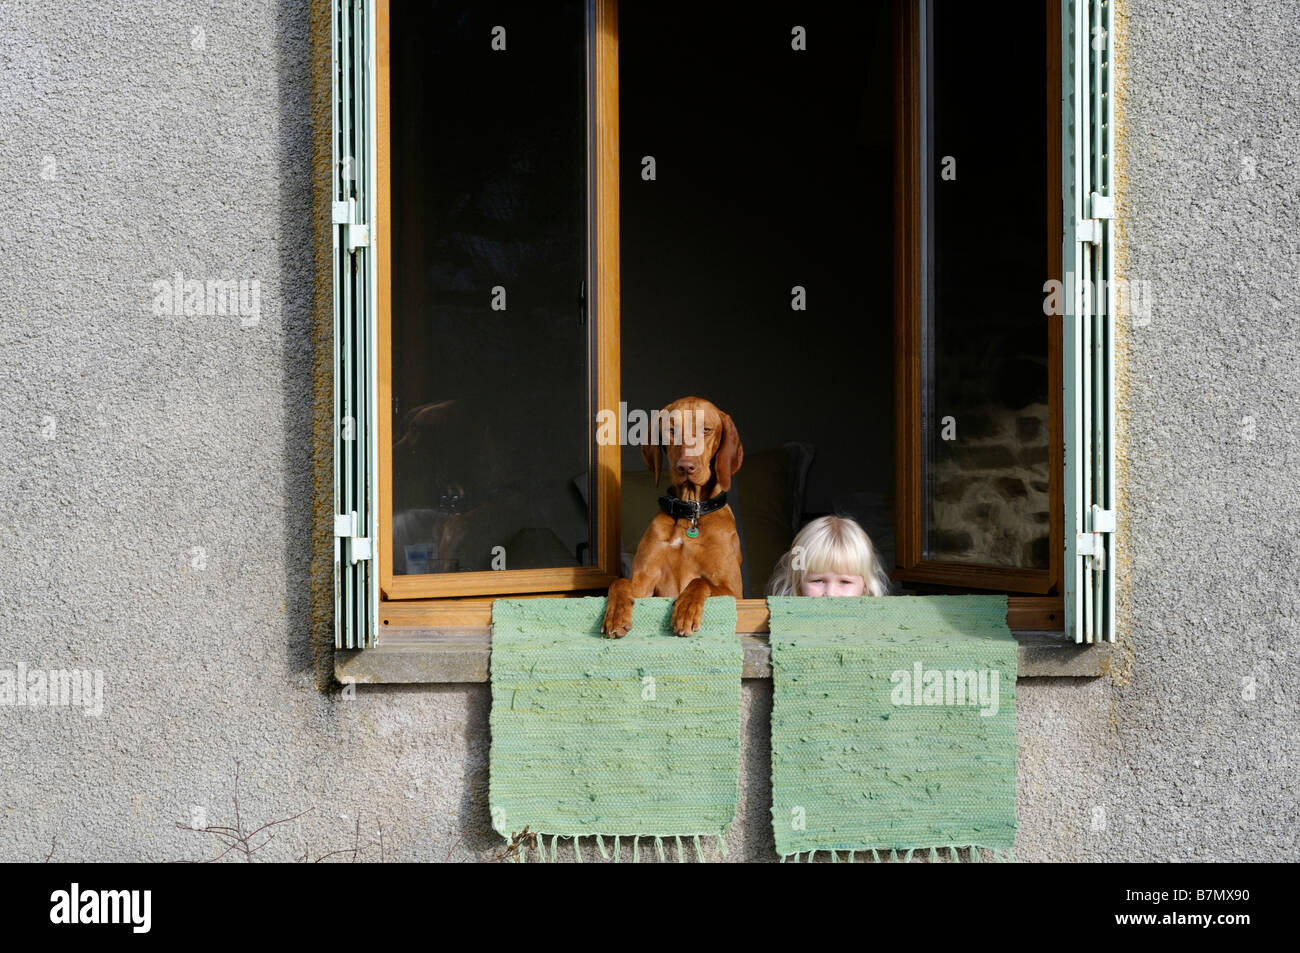 Stock photo of a little girl and her pet dog looking out of an open window Stock Photo